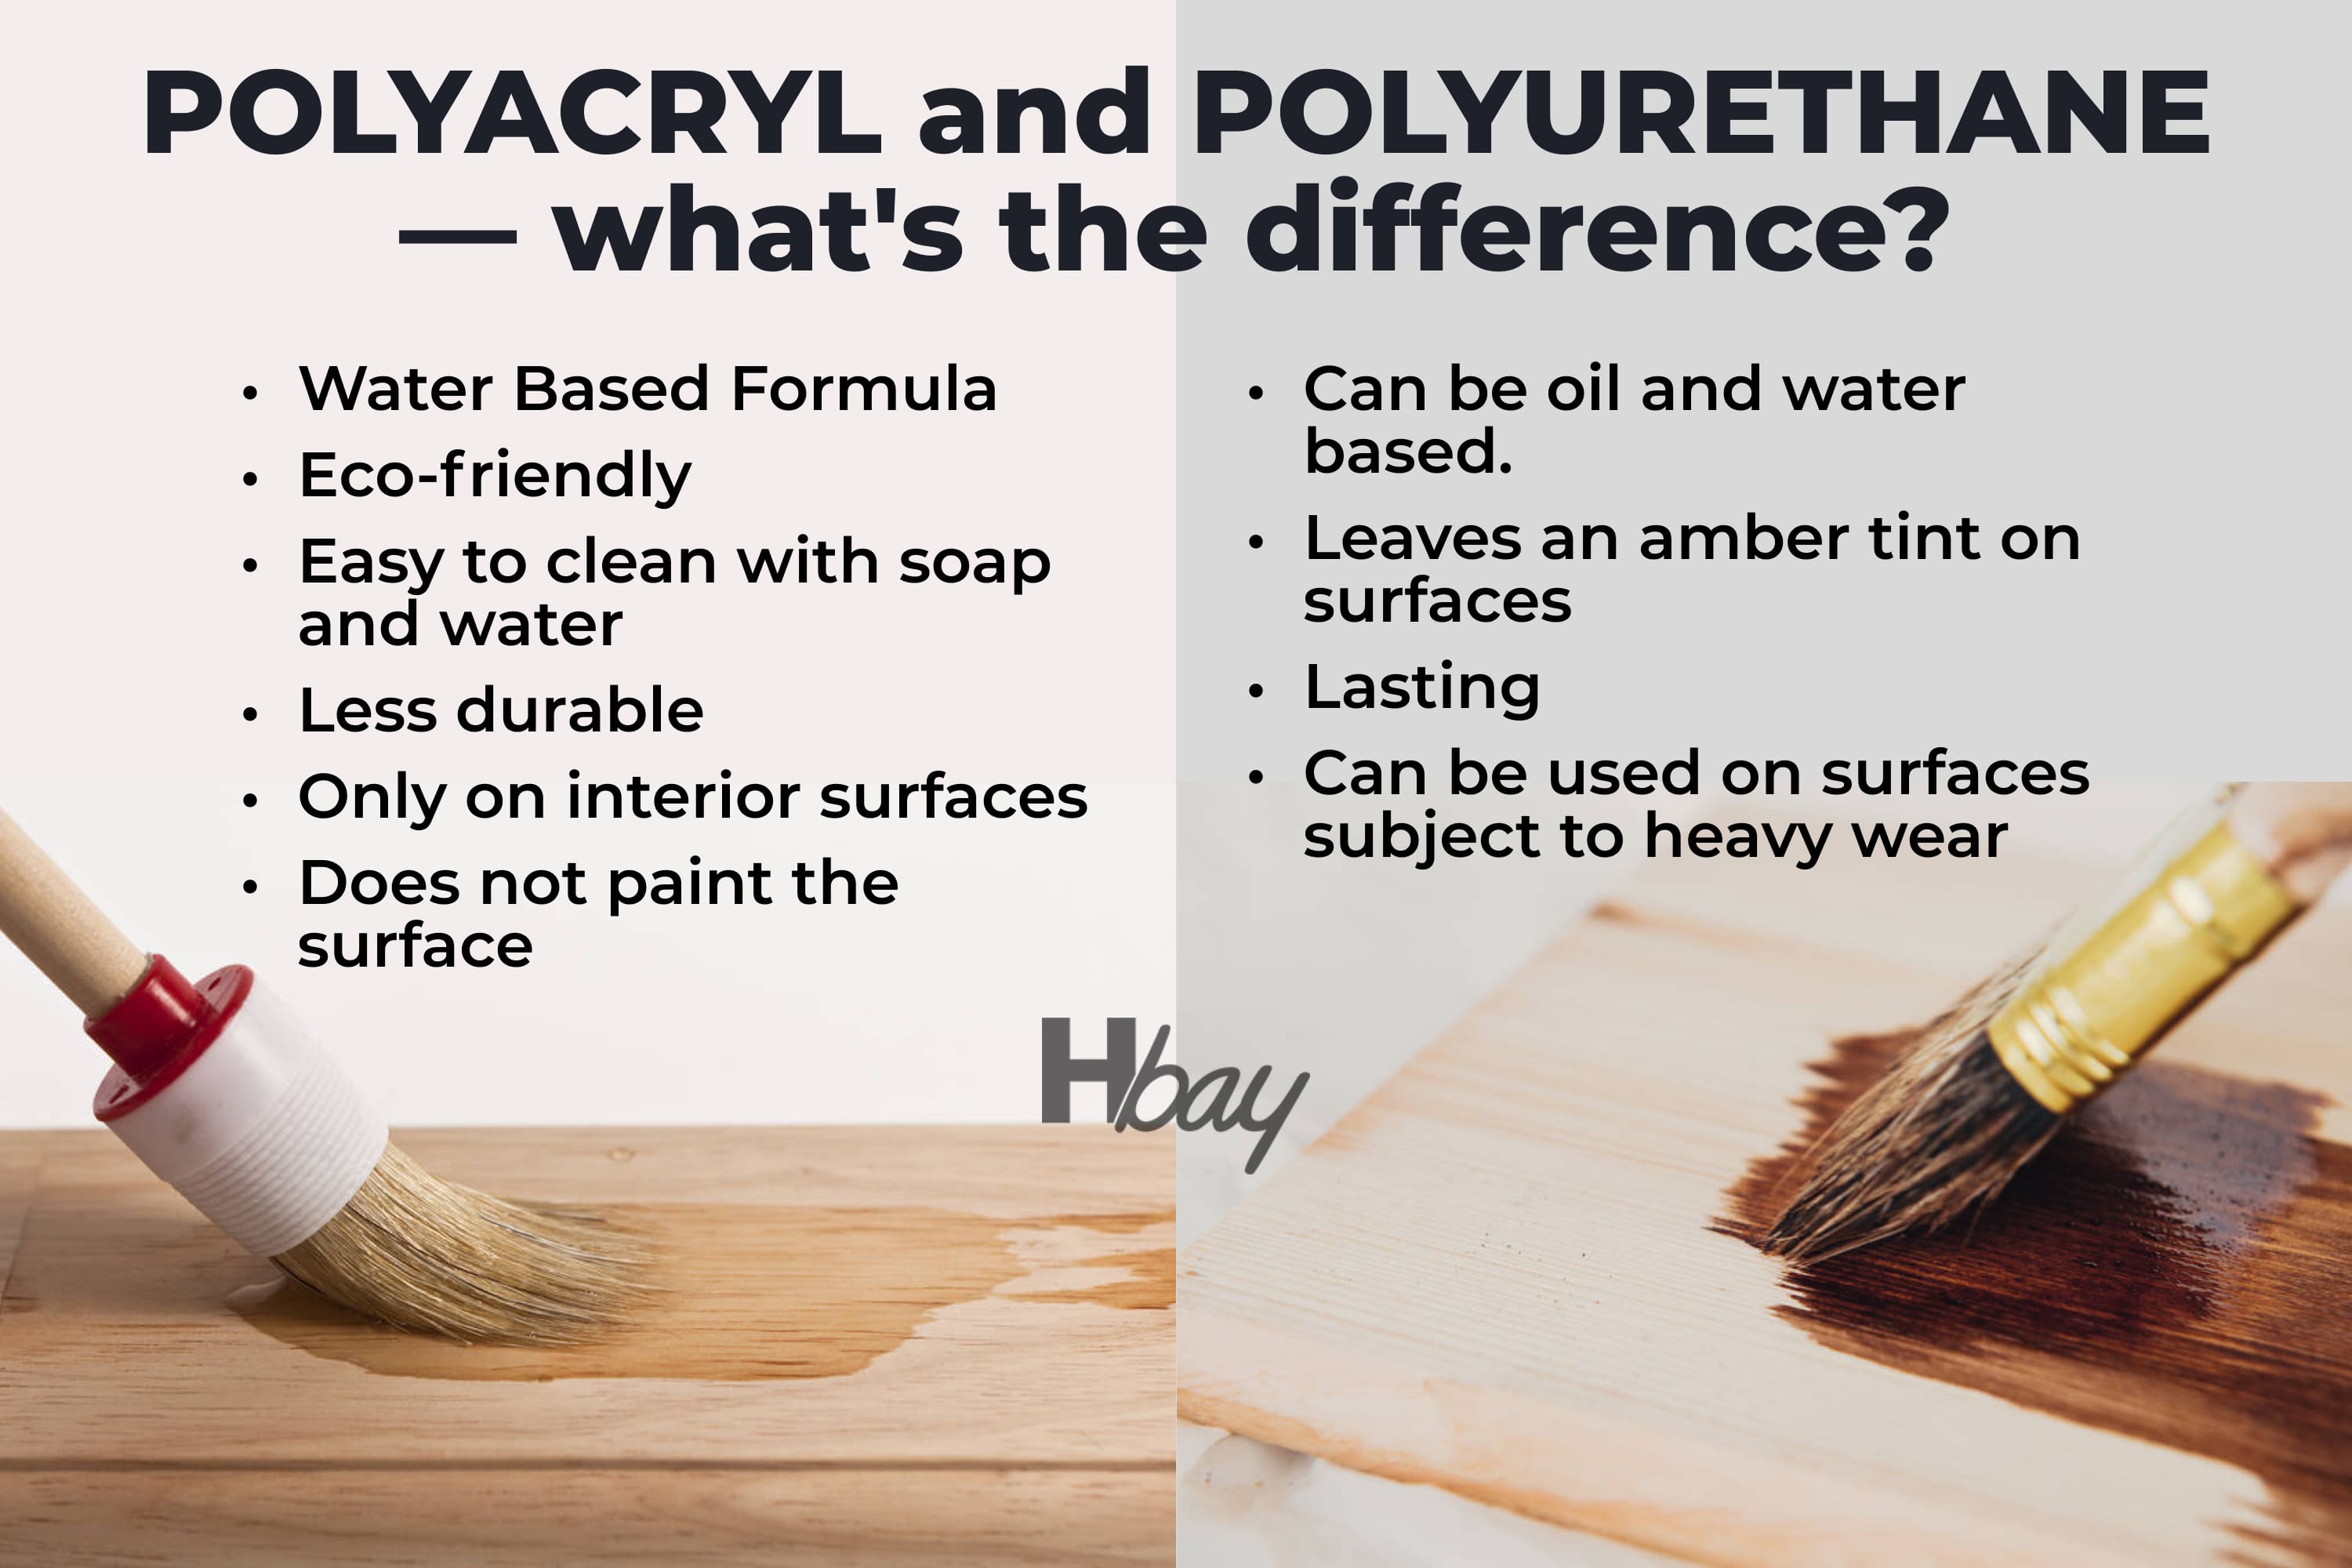 Polyacryl and polyurethane – what’s the difference